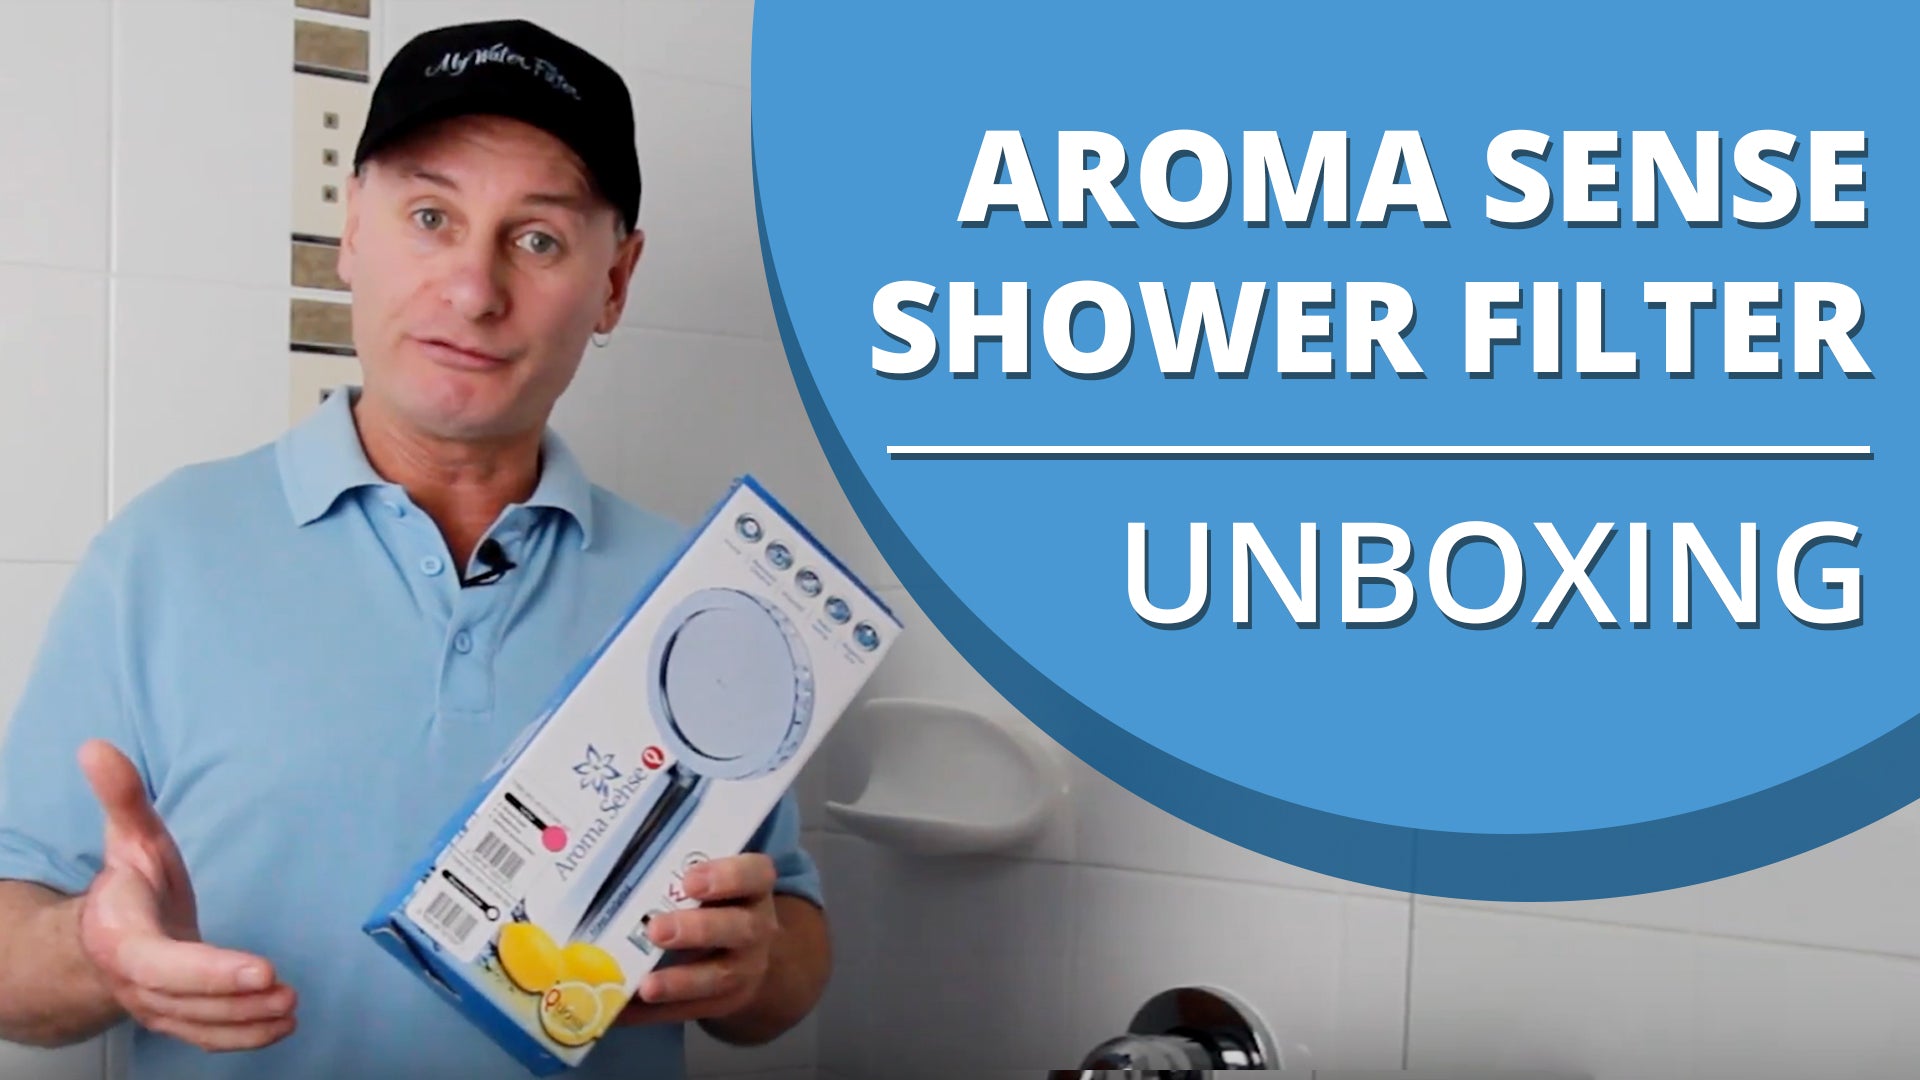 [VIDEO] Aroma Sense Q Vitamin C Shower Filter Shower Head with Hose and Bracket - Unboxing